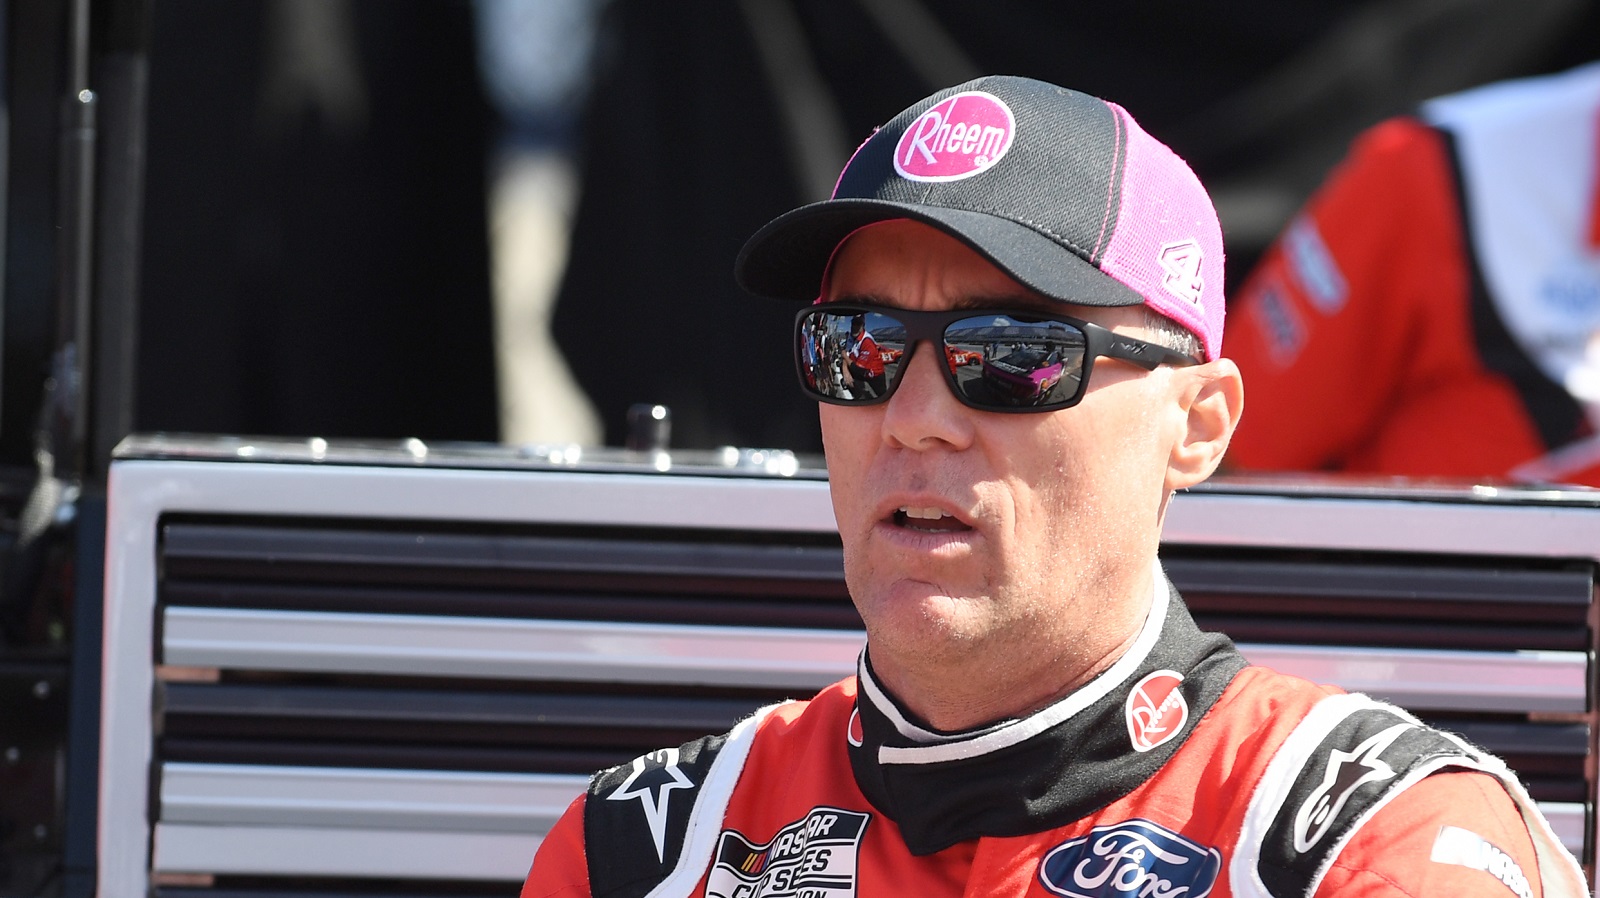 Kevin Harvick looks on during practice for the NASCAR Cup Series Goodyear 400 on May 7, 2022, at Darlington Raceway.